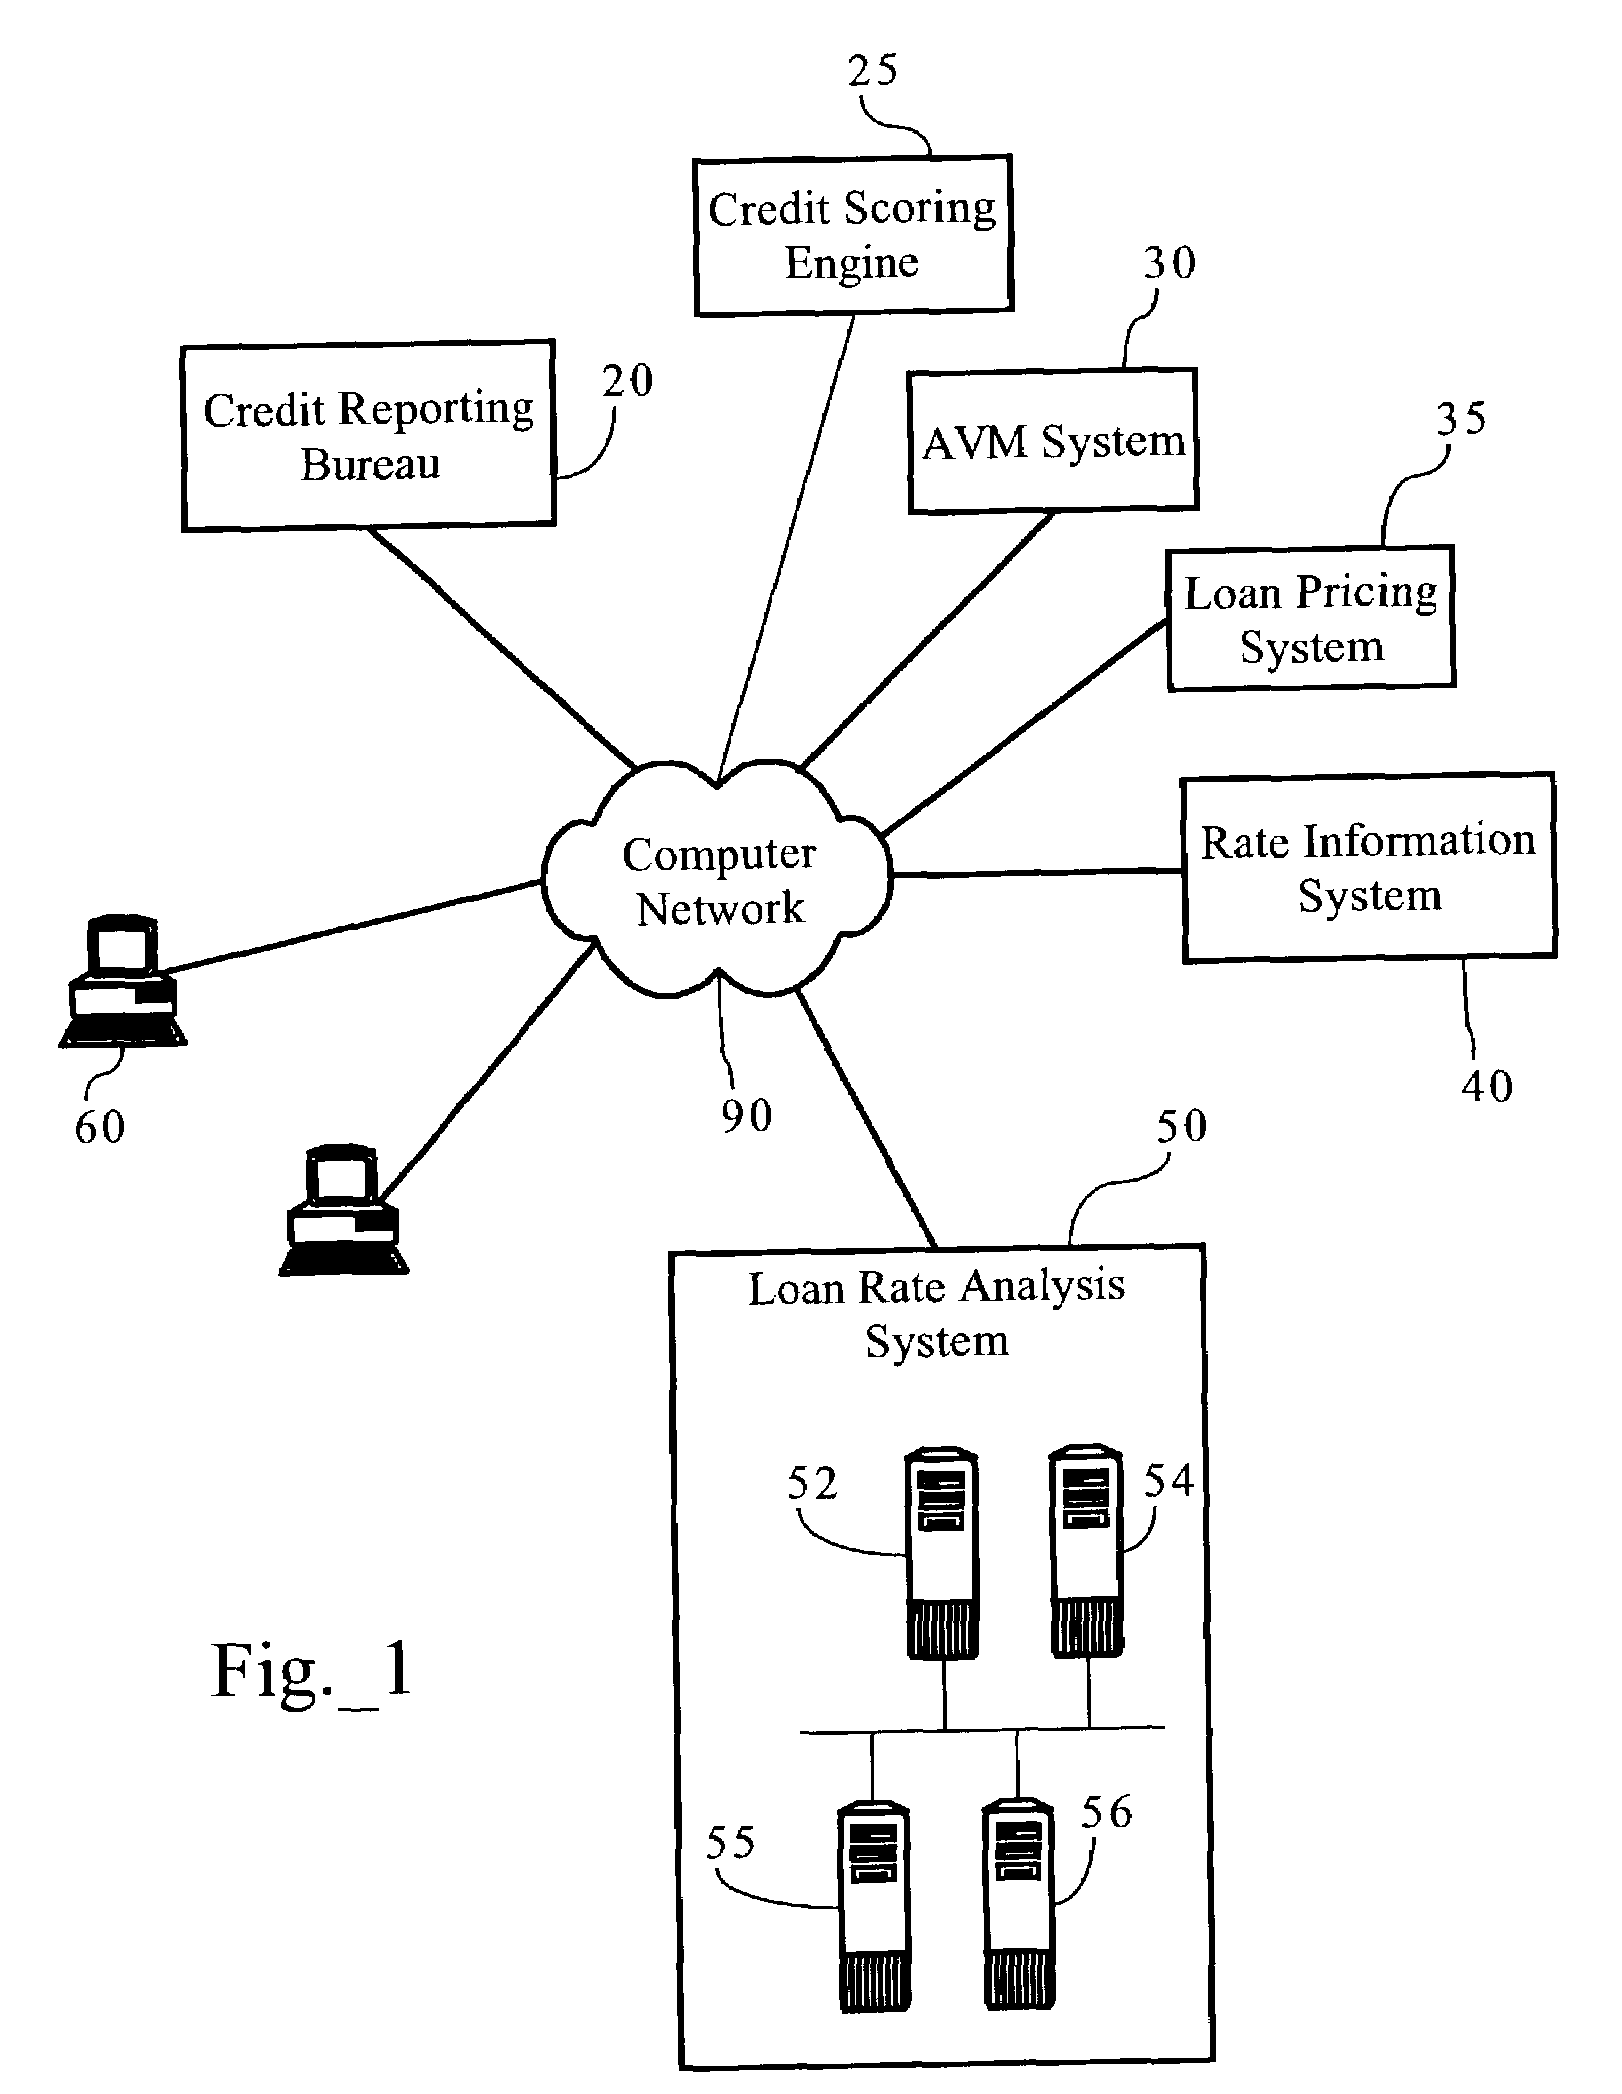 Loan rate and lending information analysis system